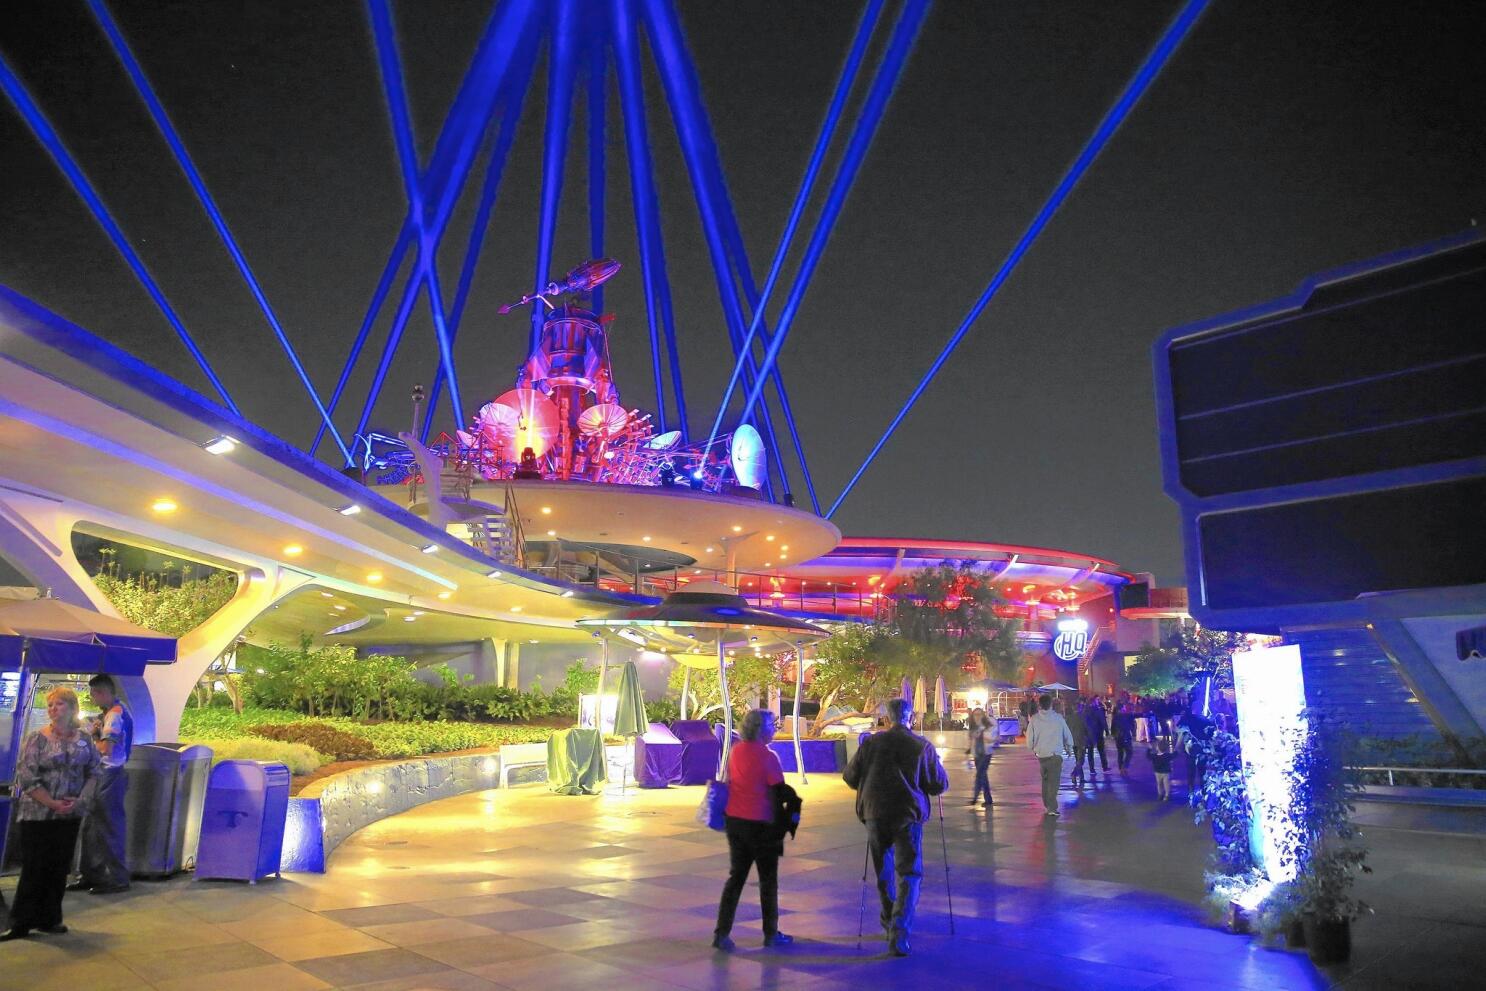 Disneyland to close some attractions to build 'Star Wars' land, Travel